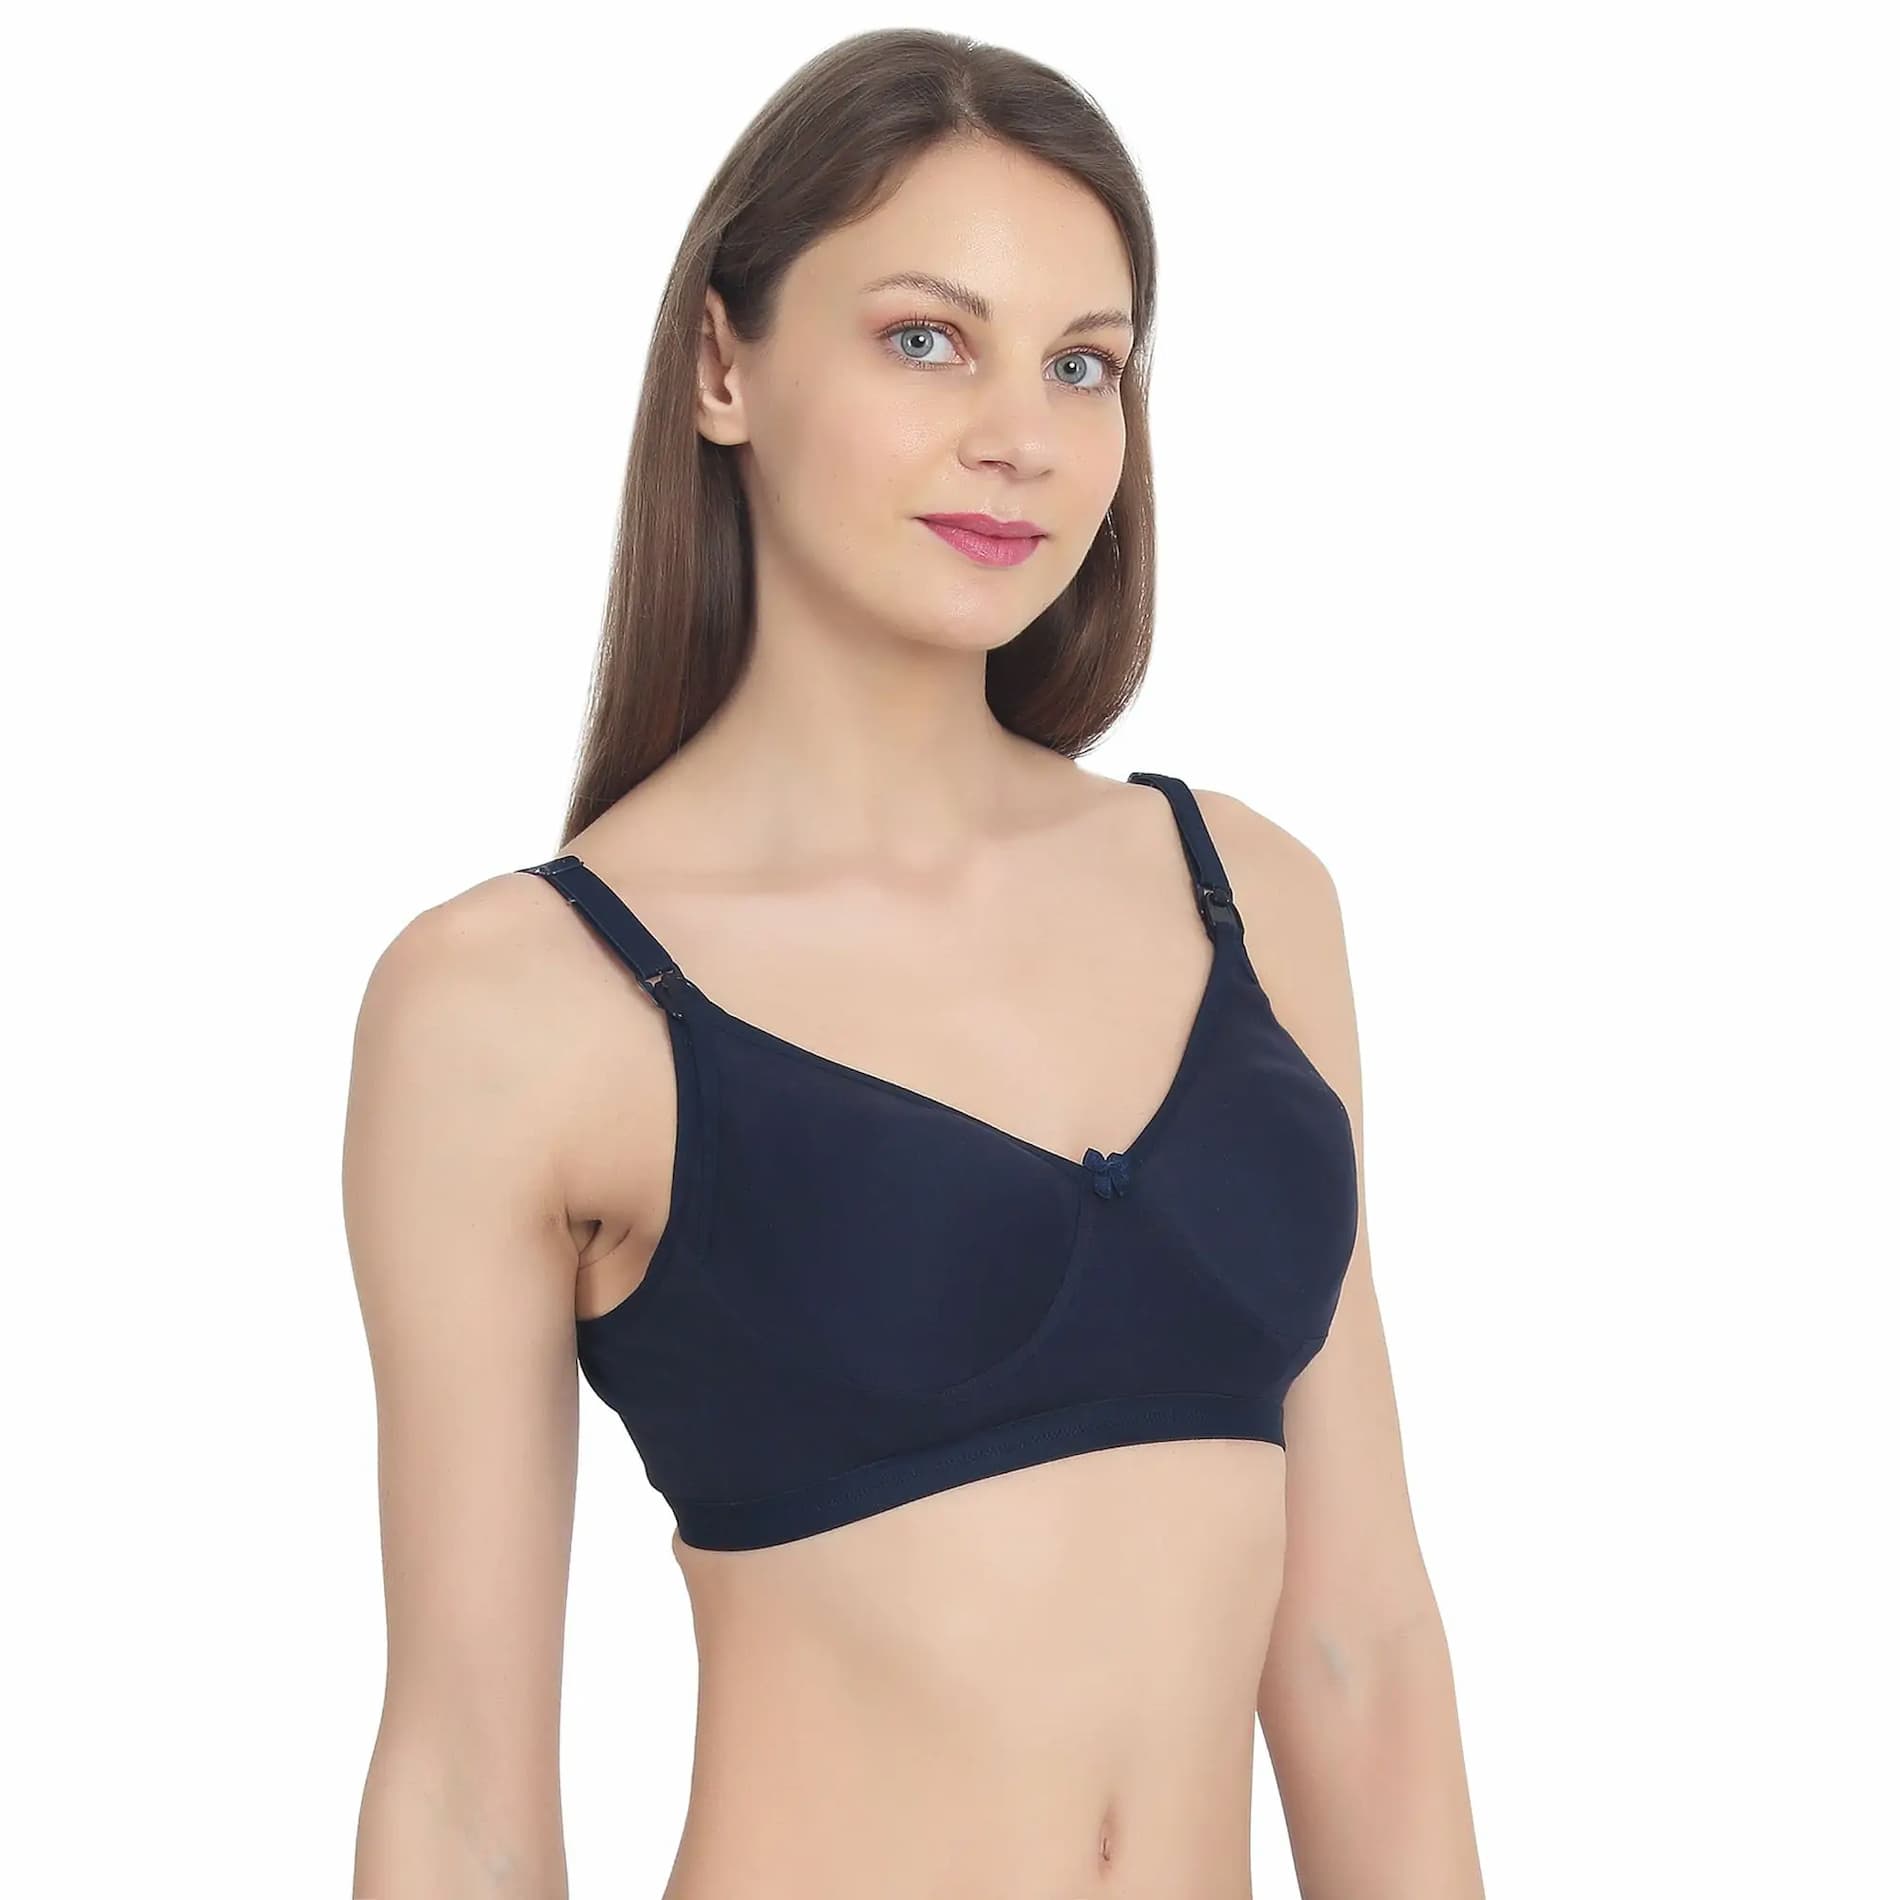 Mylo Maternity/Nursing Moulded Spacer Cup Bra Pack of 2 with free bra extender -(Navy, Skin) 34B   